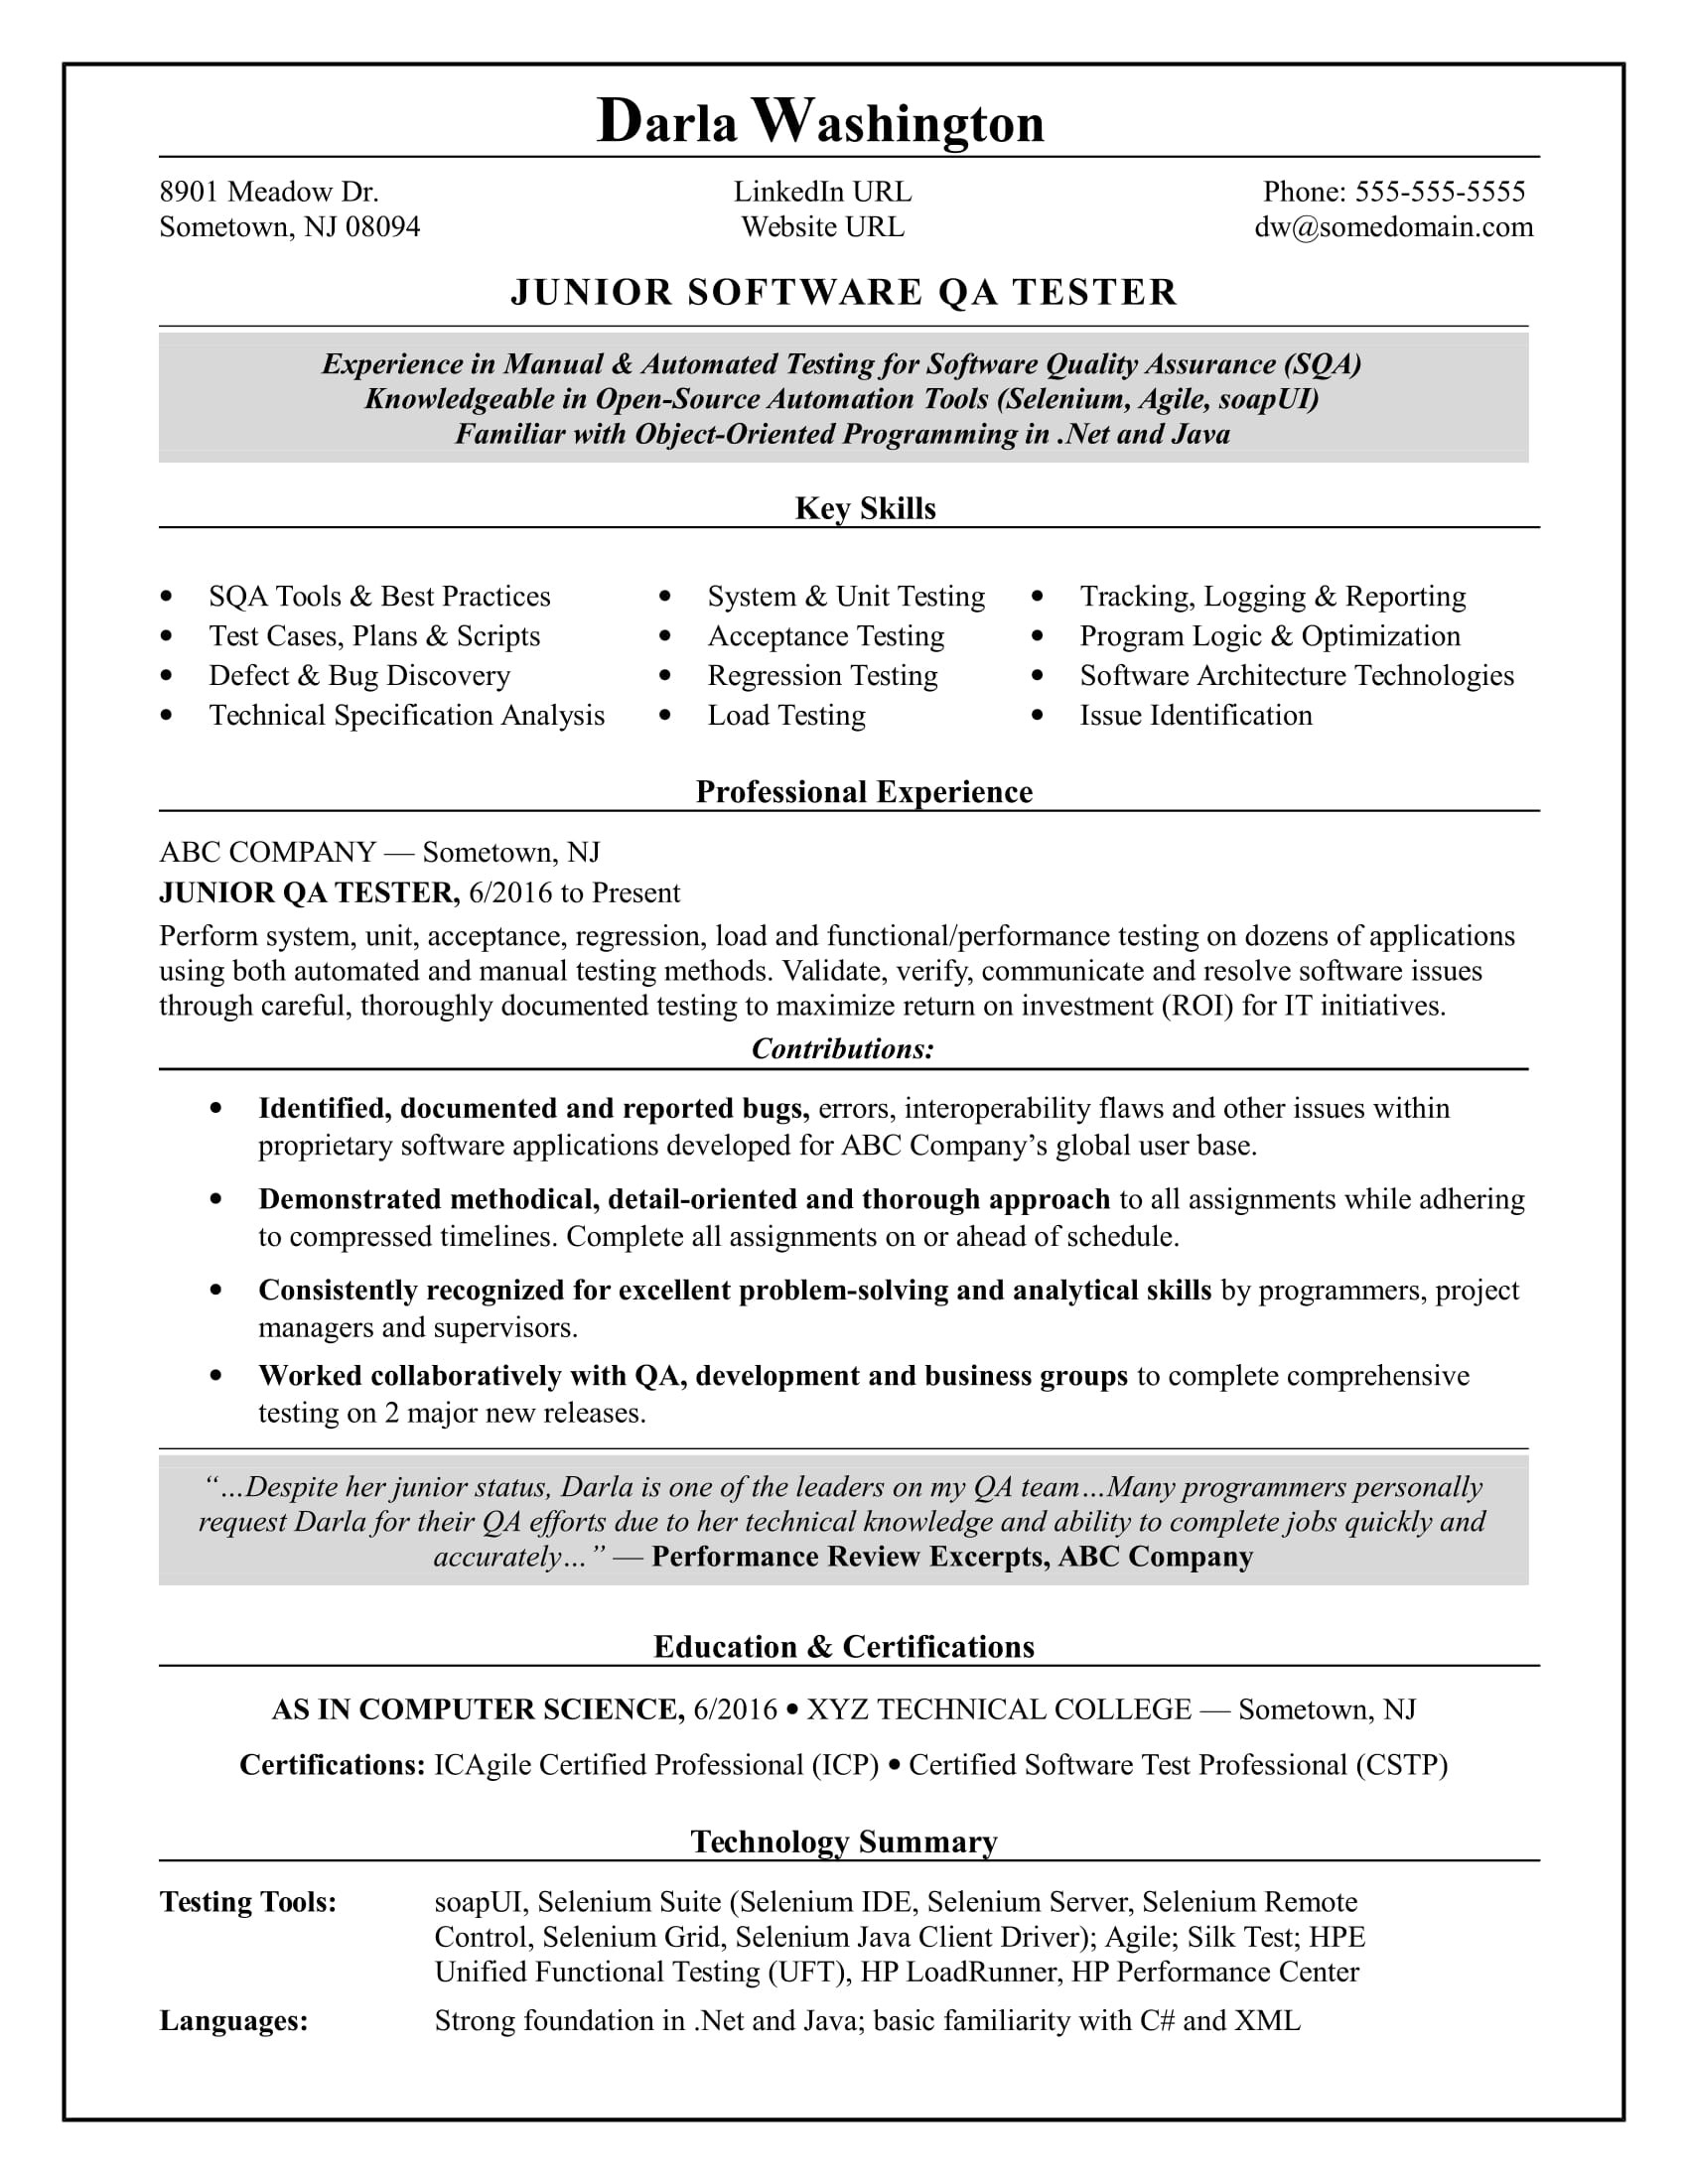 Finguring Out Major Defects as Qa In Resume Sample Entry-level software Tester Resume Monster.com